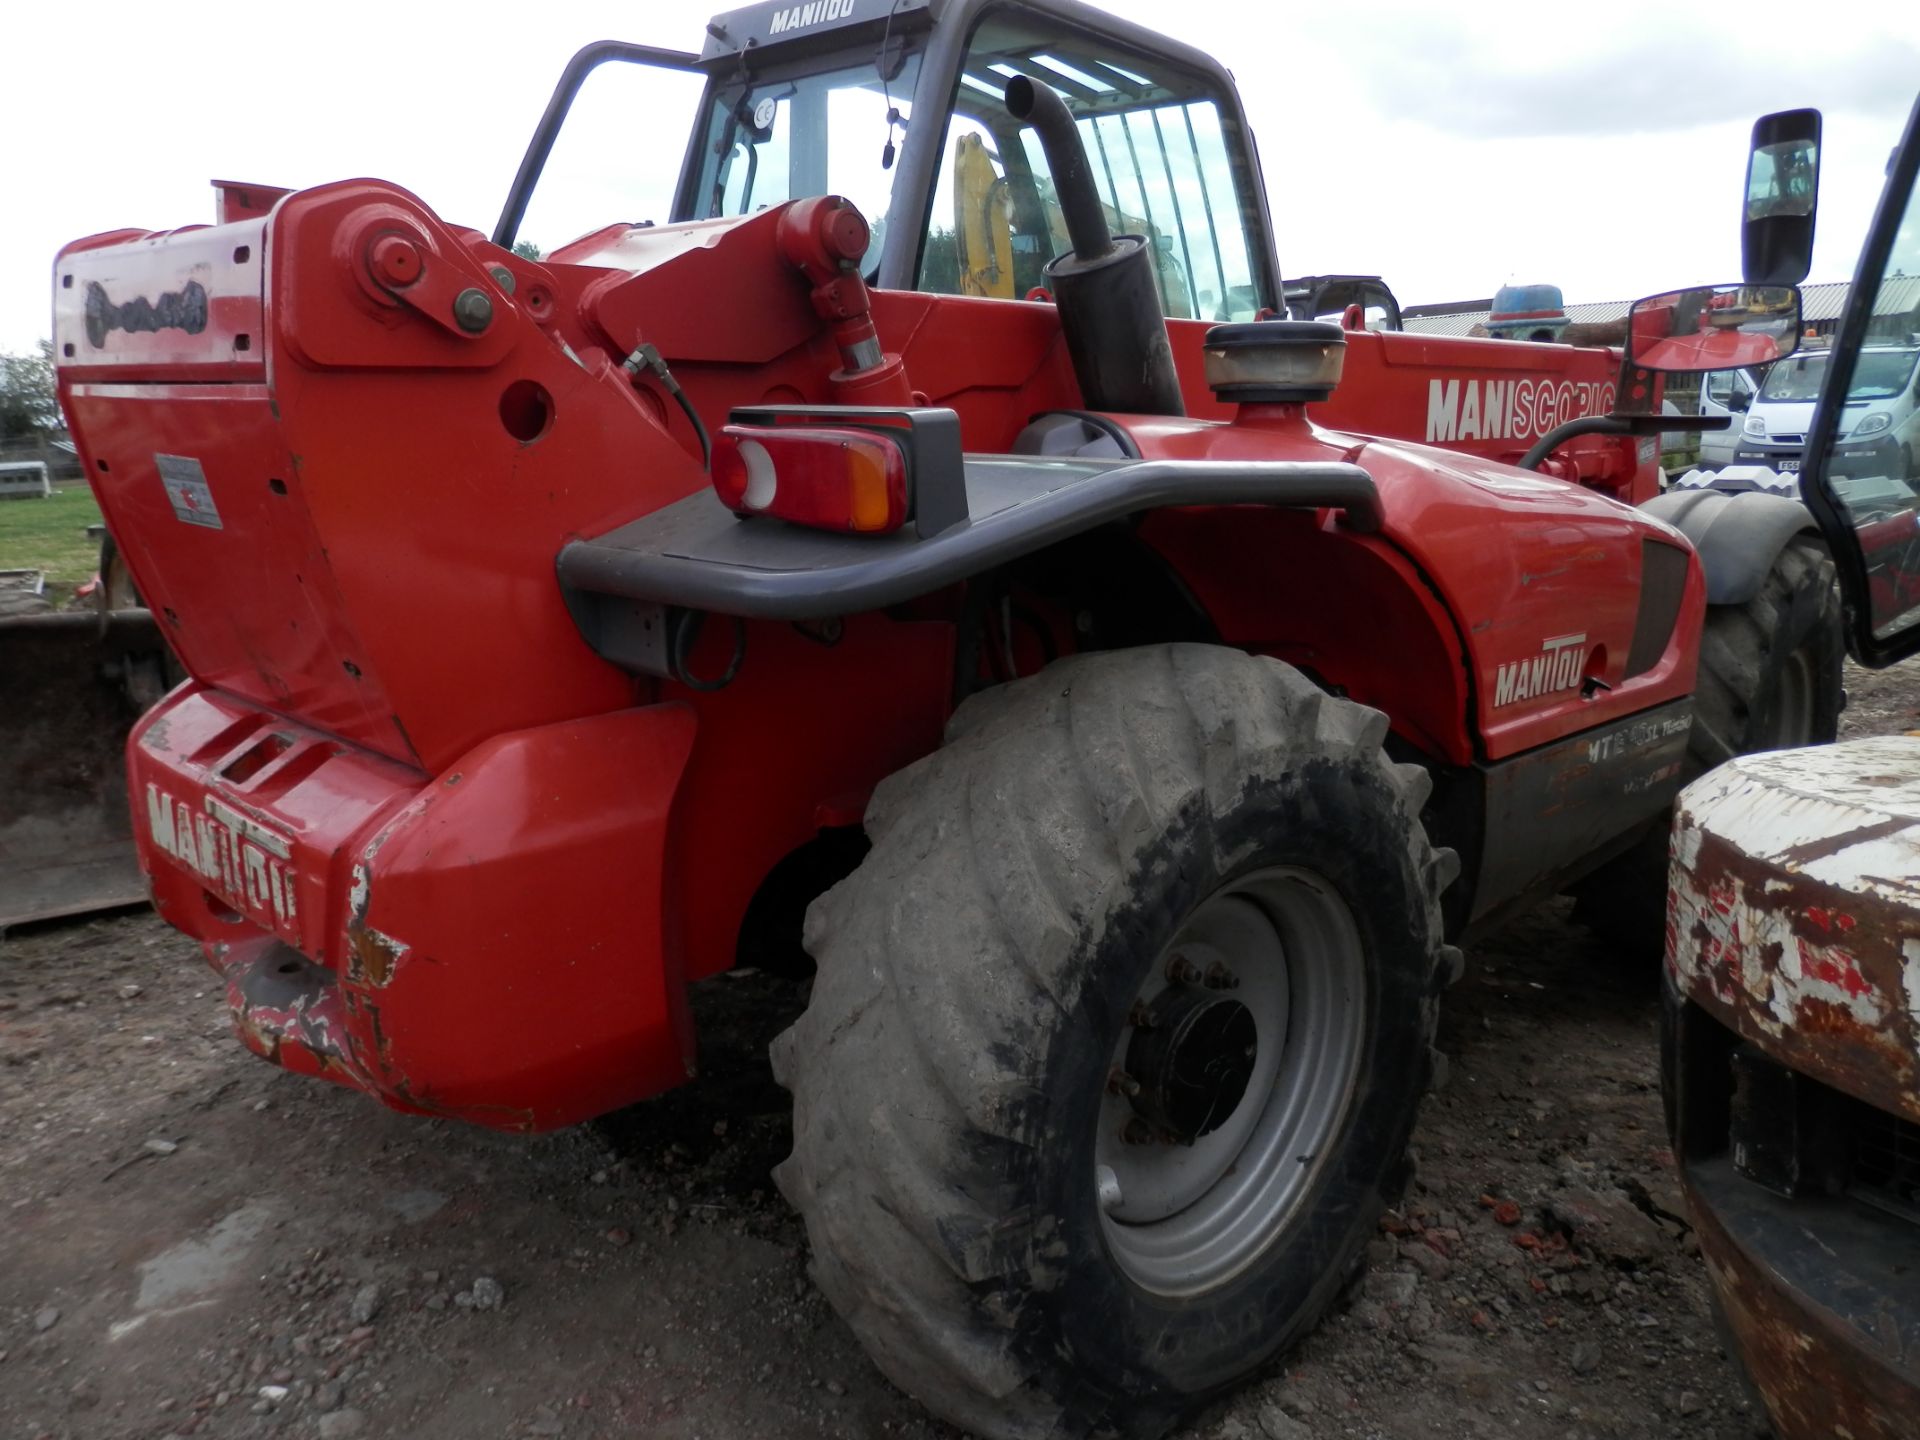 2003 MANITOU MANISCOPIC TELE LIFT WITH FORKS,3.5 TONNE LIFT CAPACITY. - Image 3 of 10